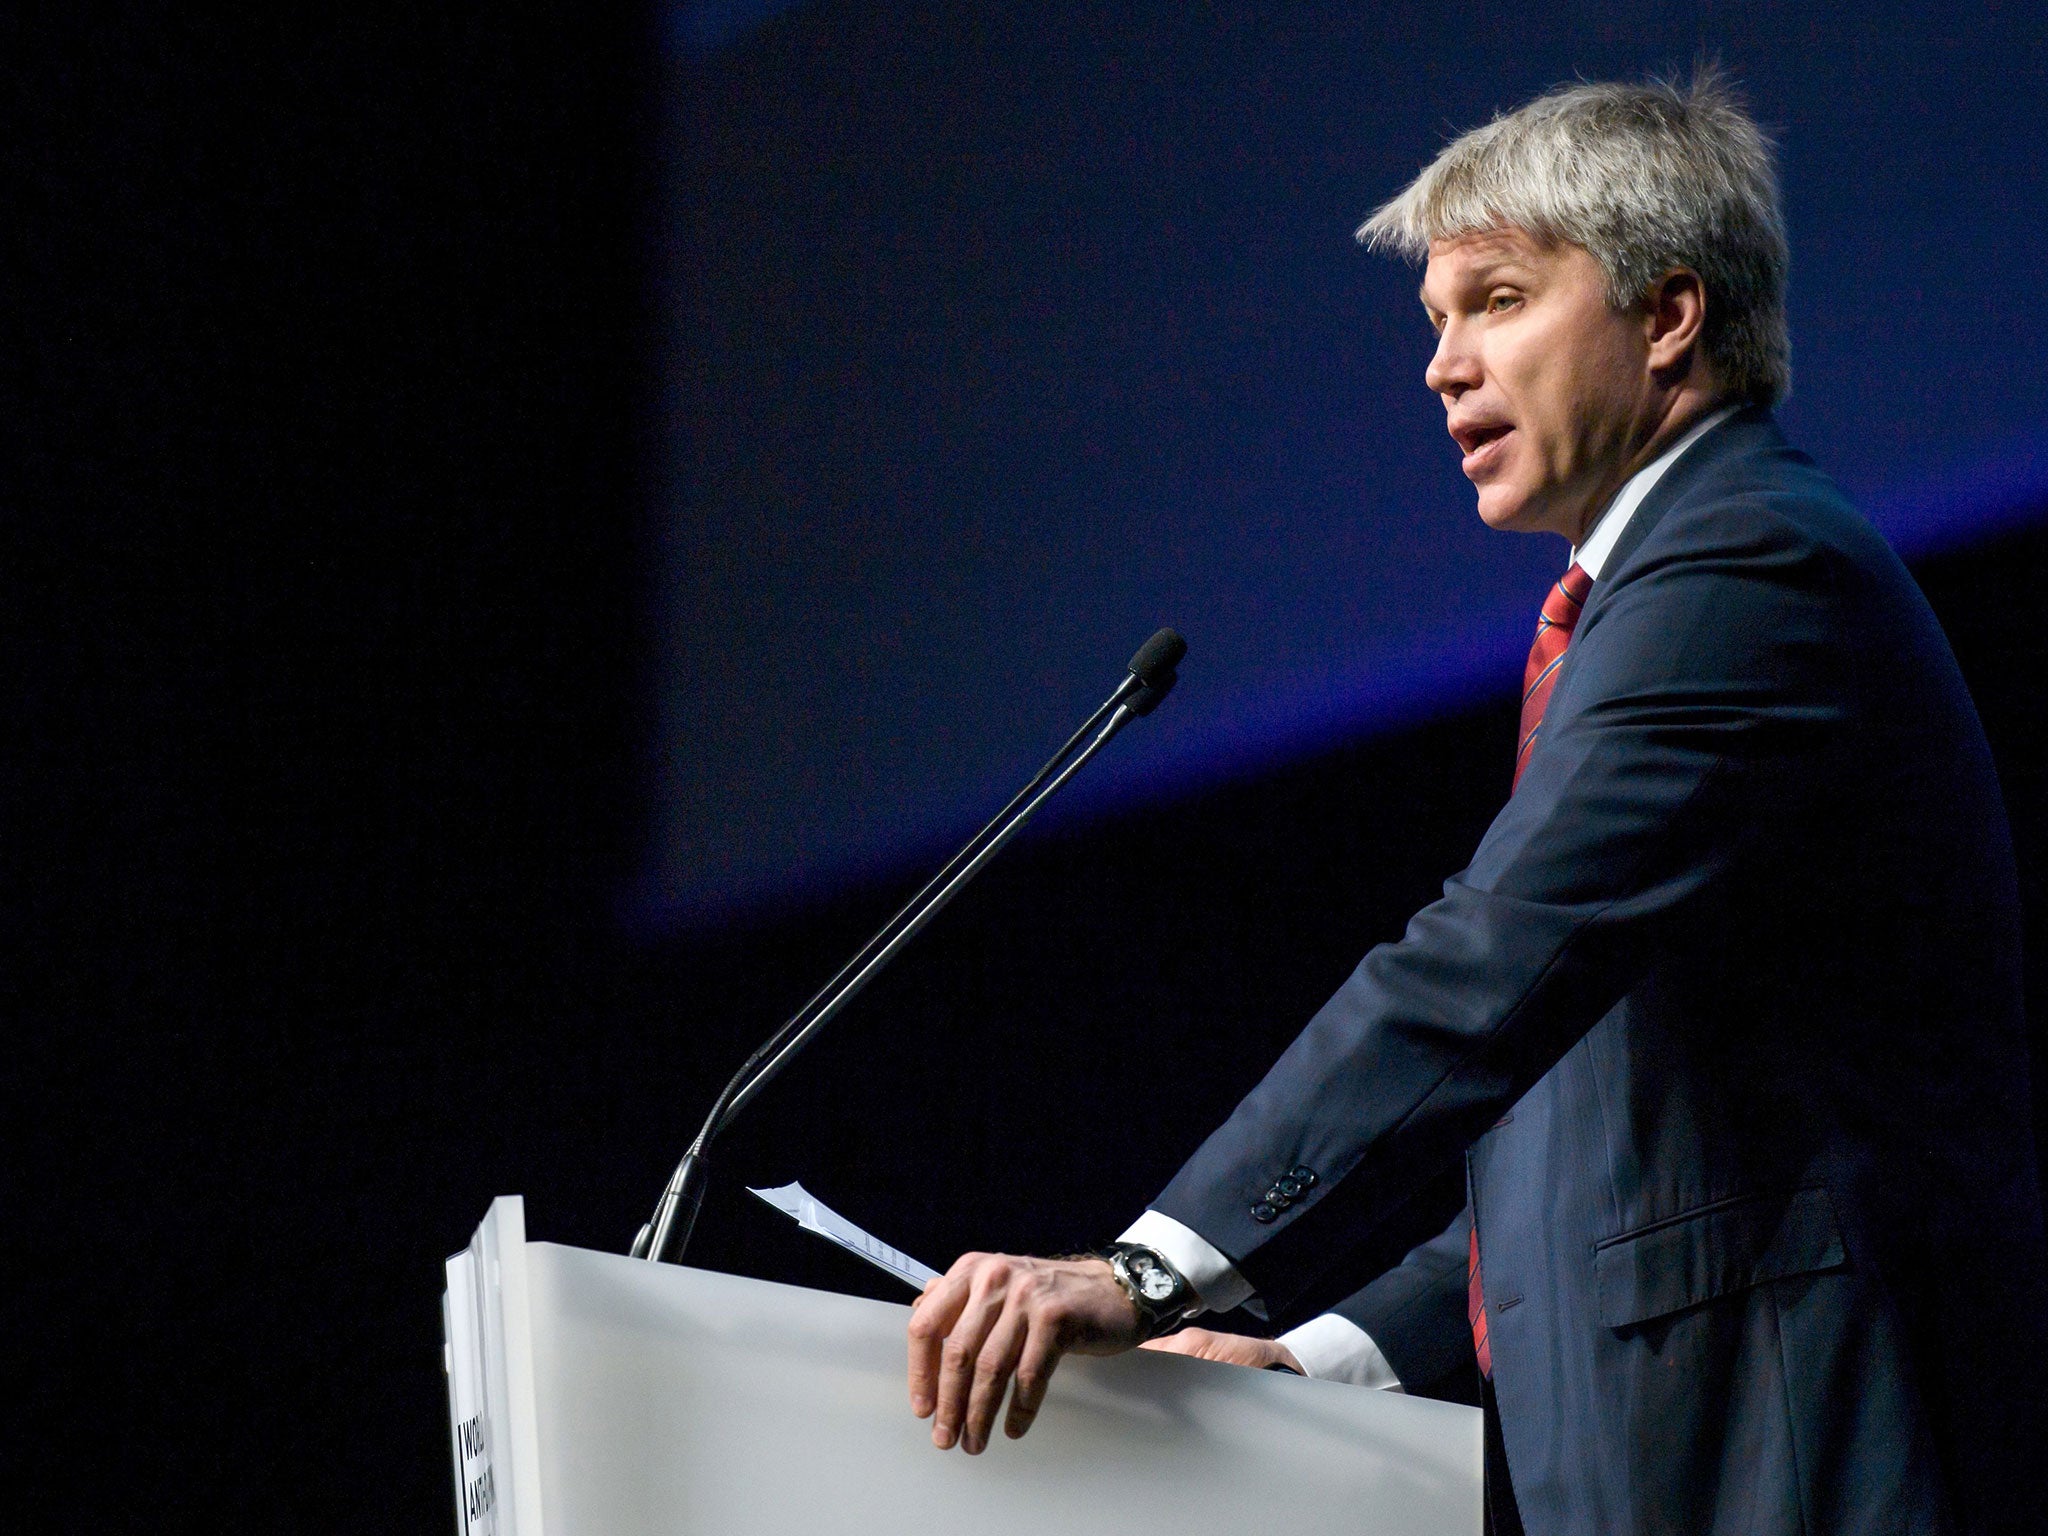 Pavel Kolobkov was speaking to more than 700 delegates at the World Anti-Doping Agency's annual symposium in Lausanne